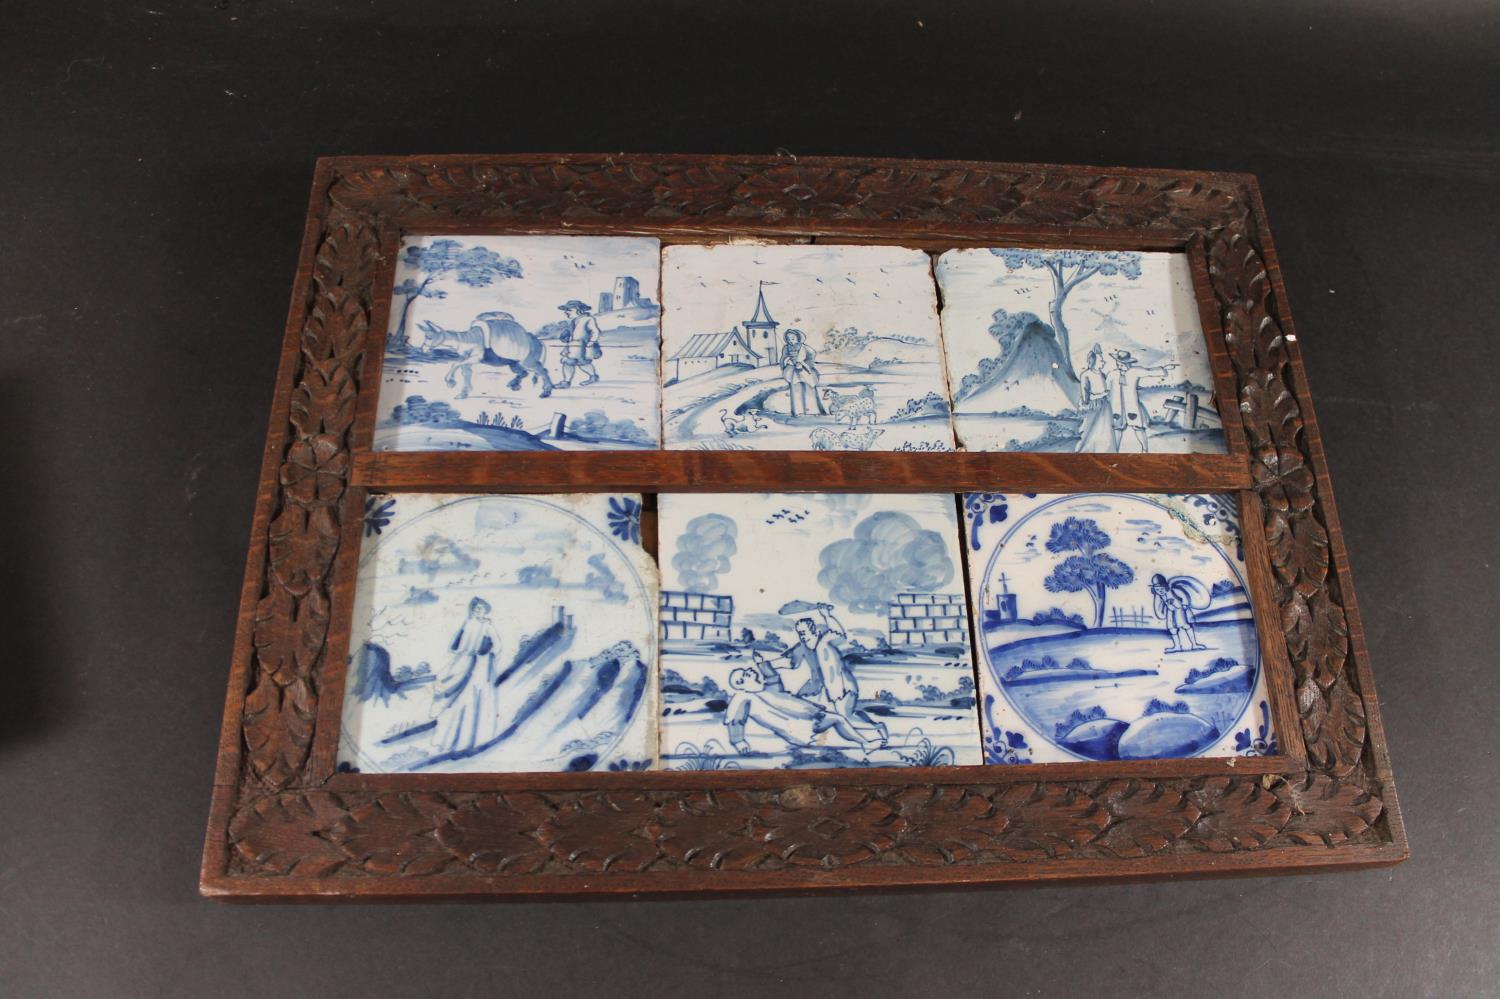 FRAMED DELFT BLUE & WHITE TILES six 18thc delft tiles, each painted with a variety of figures within